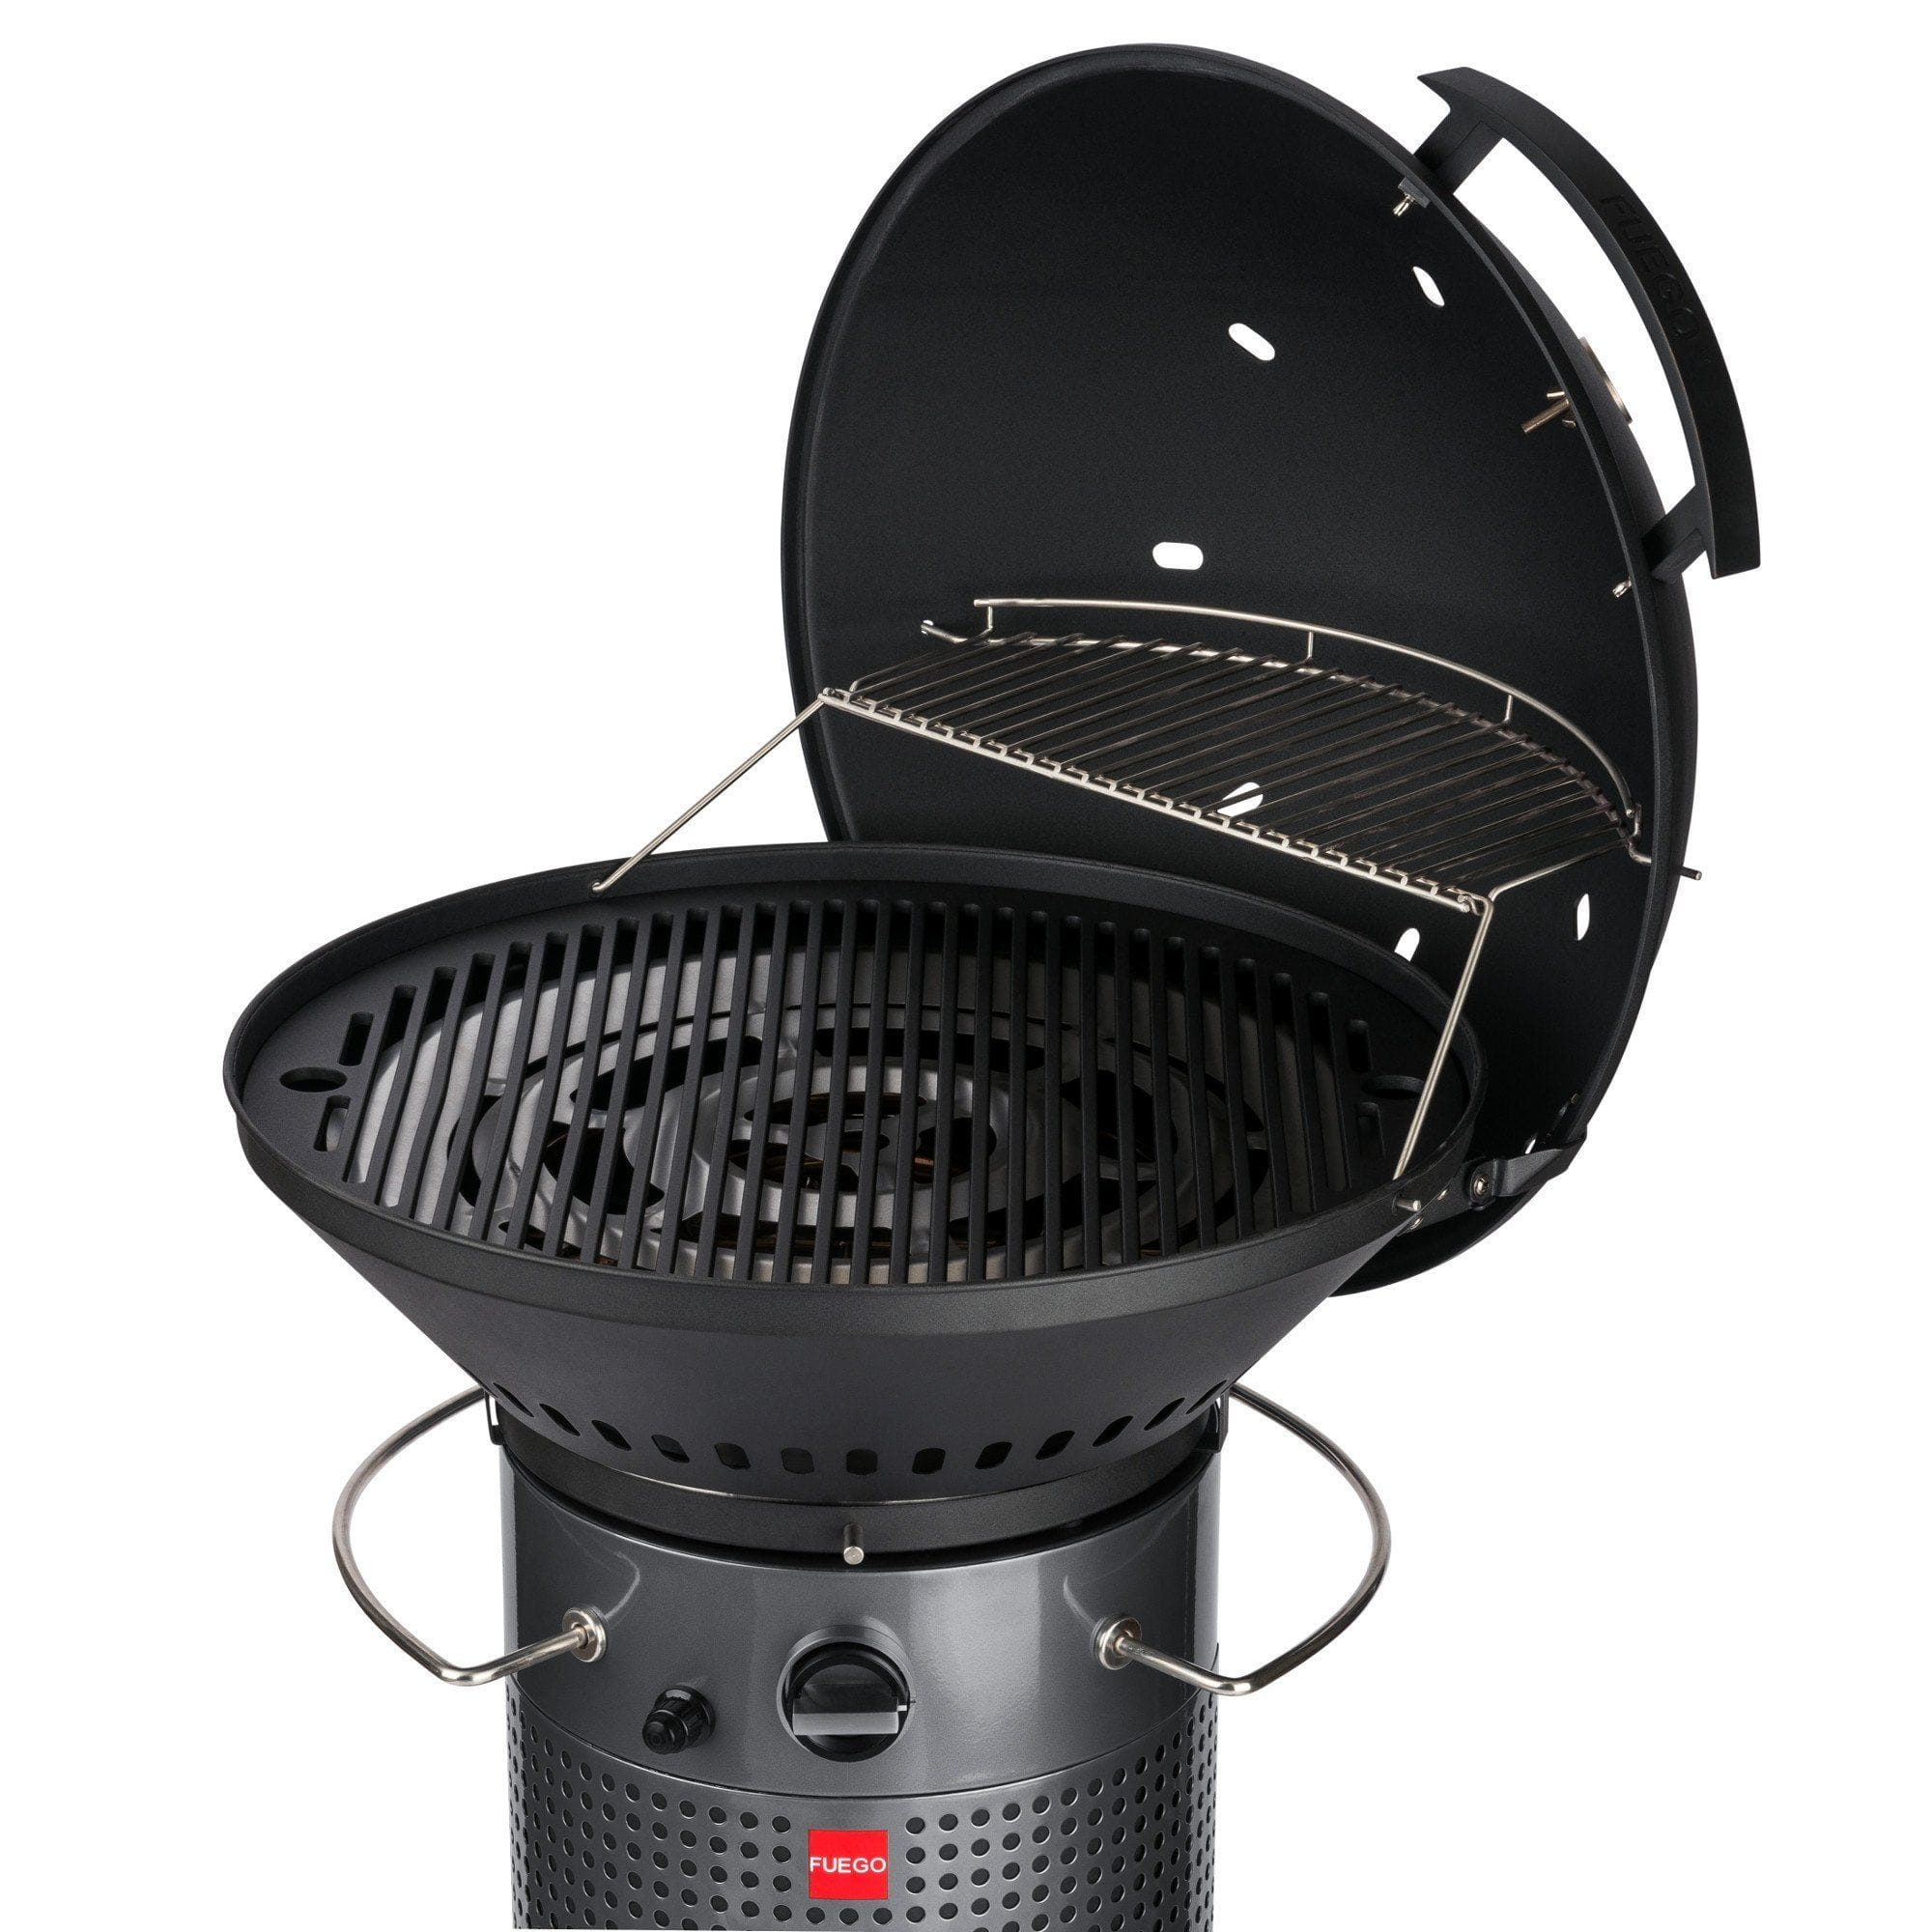 Fuego Living Freestanding Gas Grill Fuego Professional 24” Grill / F24C